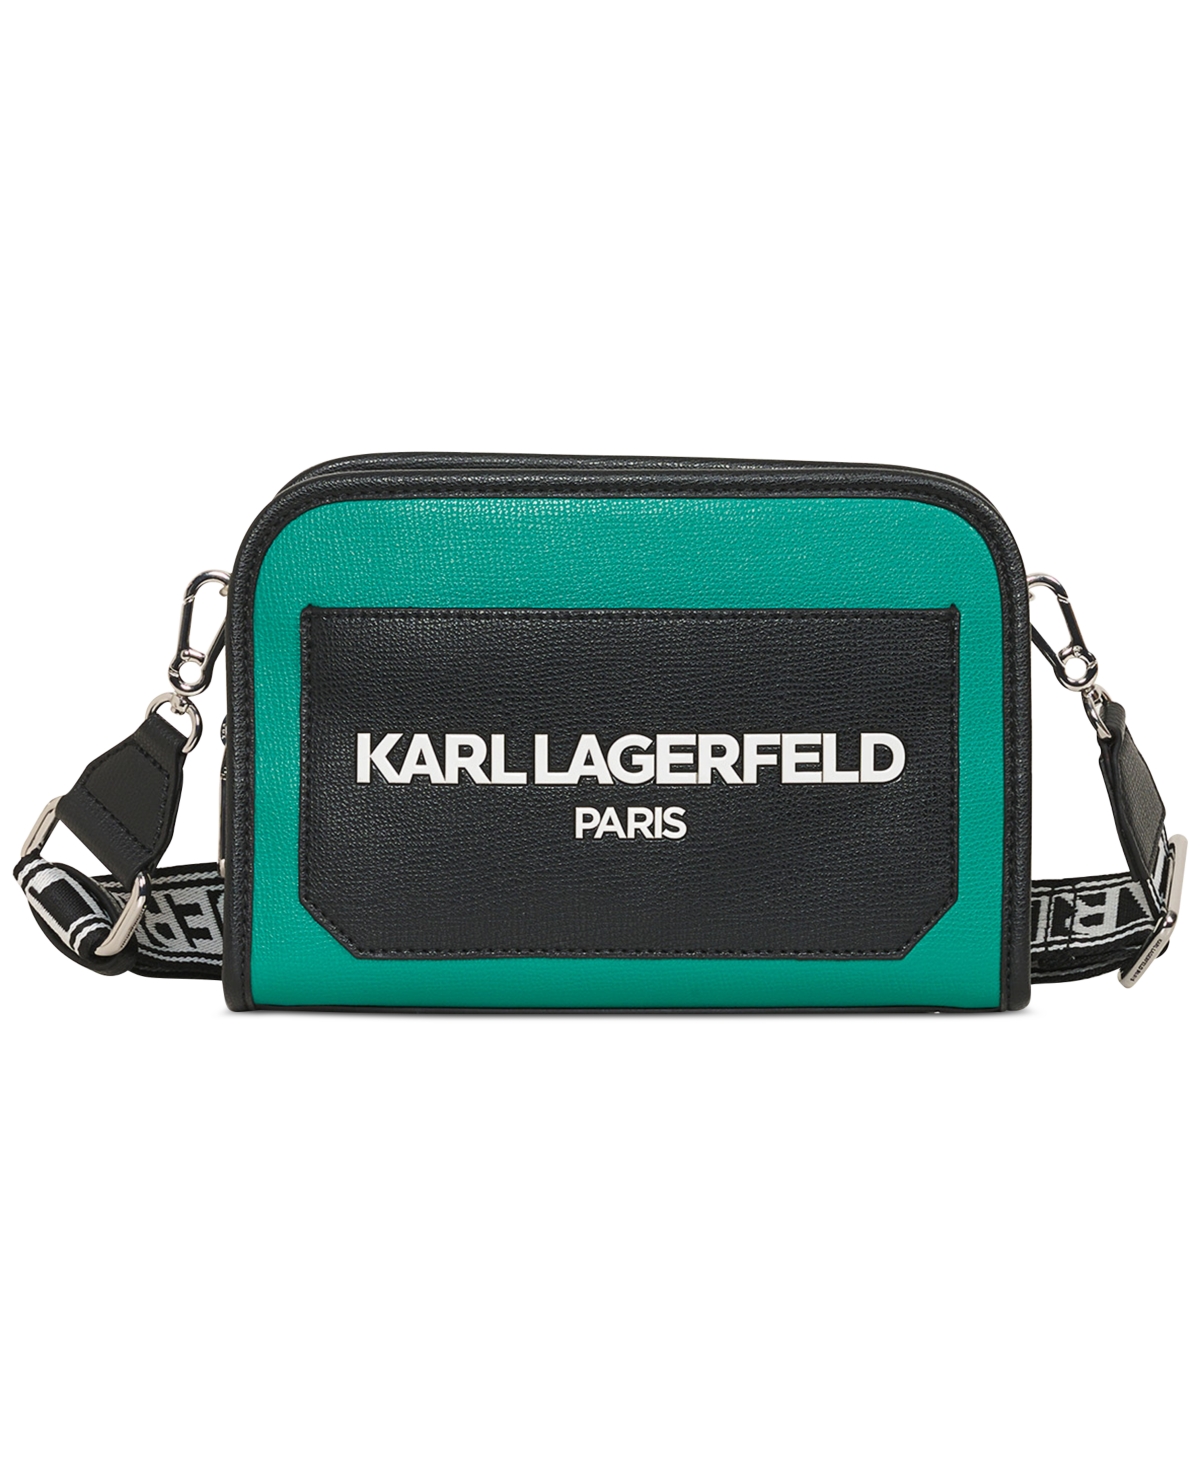 Karl Lagerfeld Maybelle Small Crossbody In Green,blac